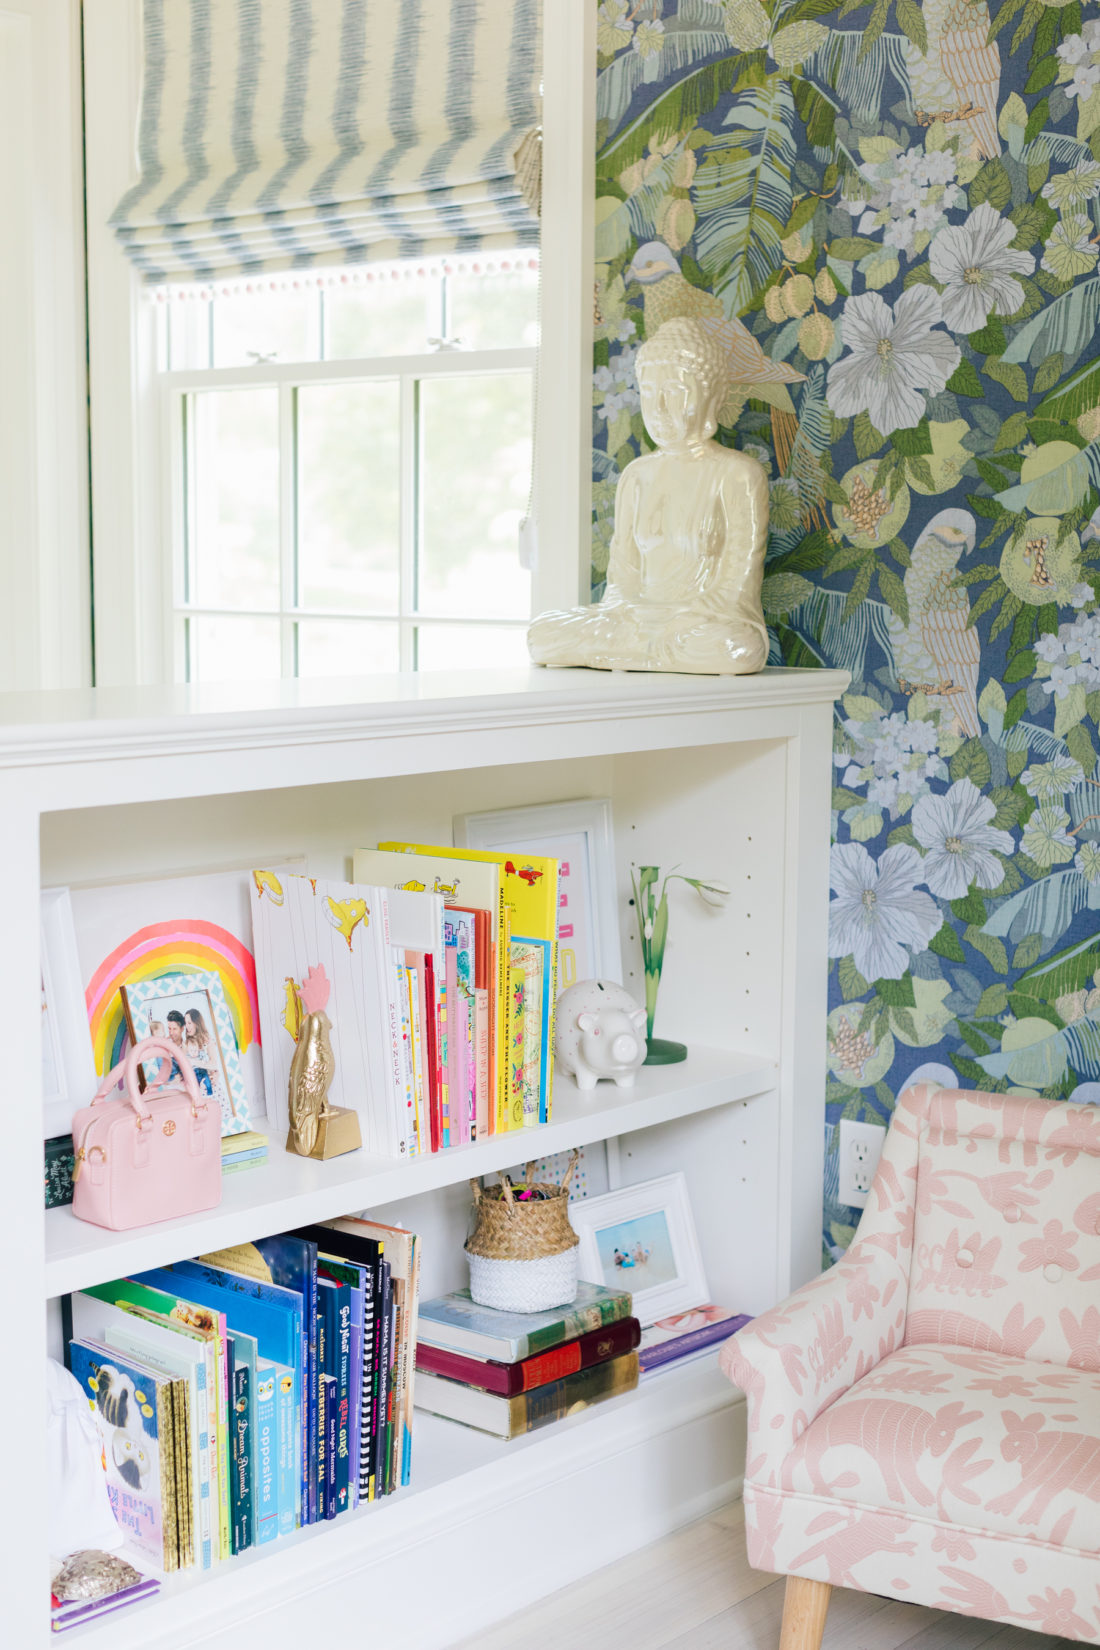 Marlowe Martino's colorful new bedroom reveal